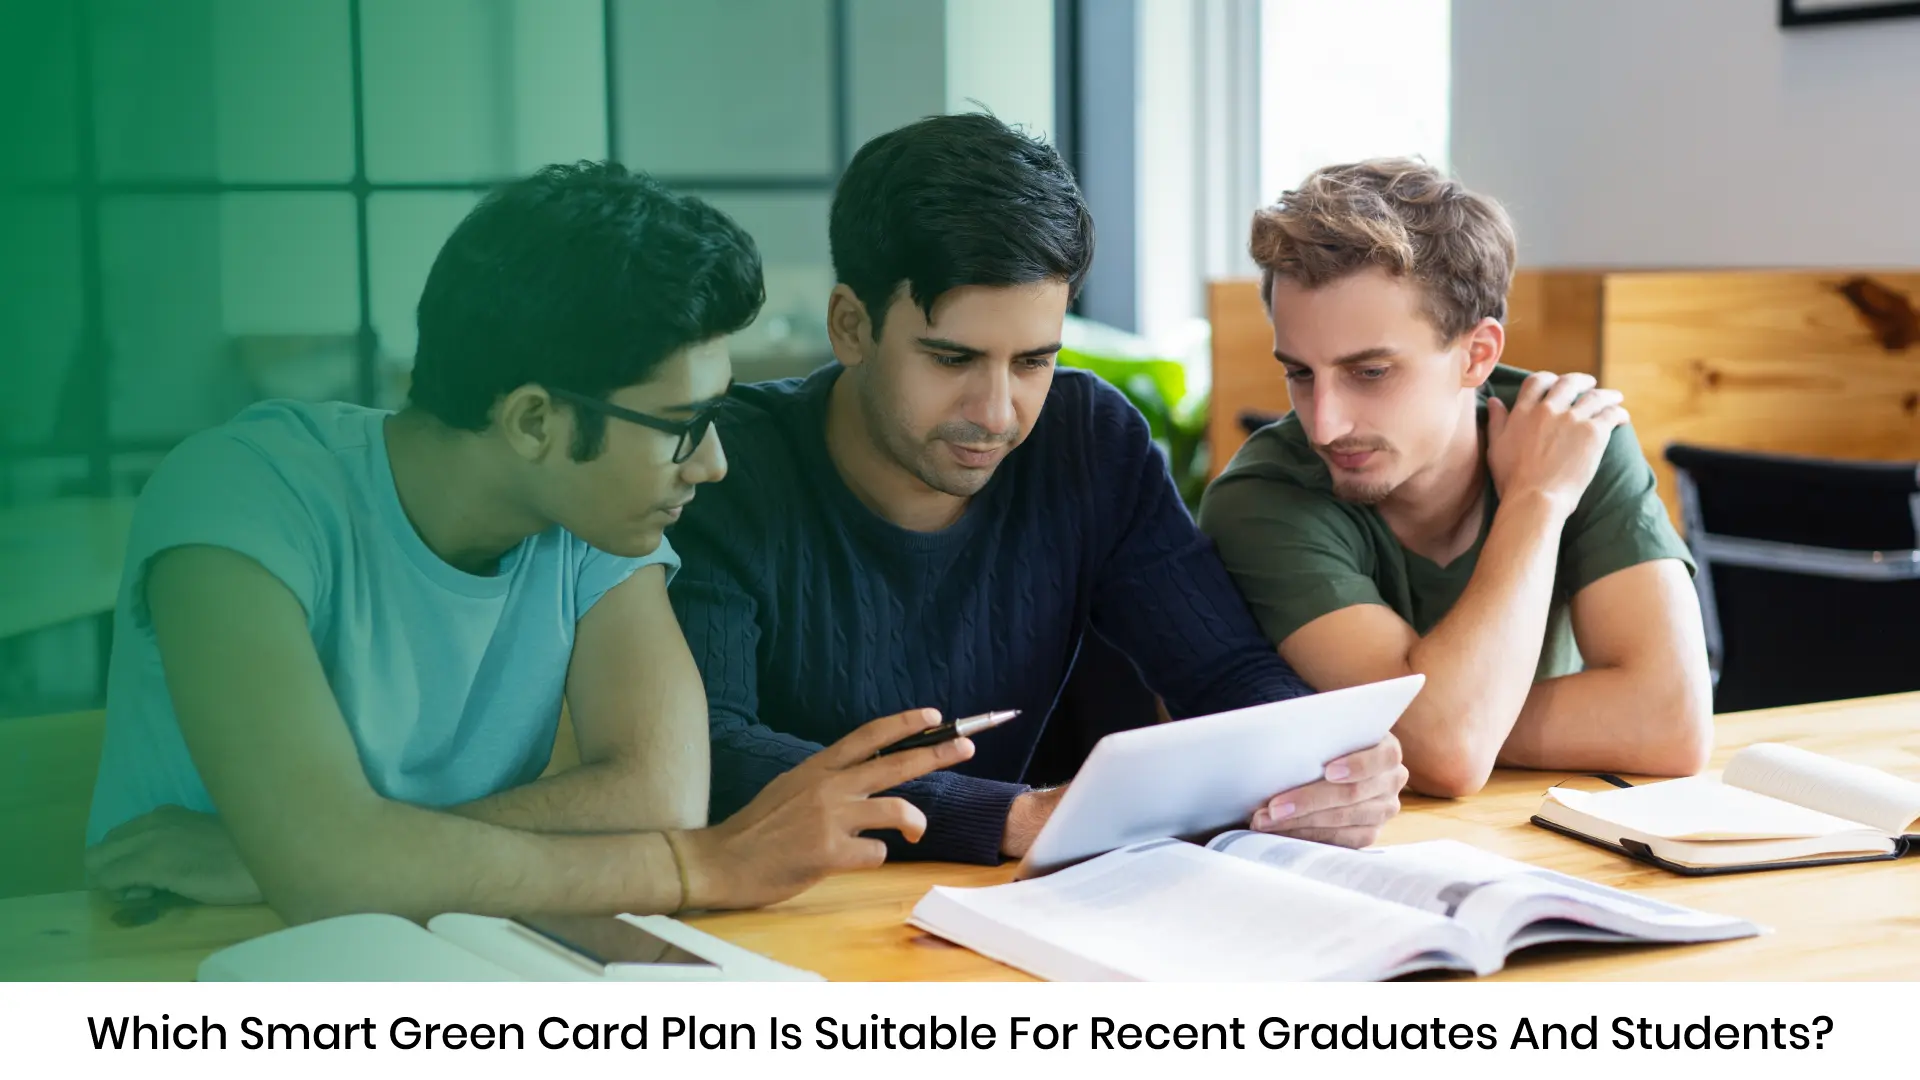 Which Smart Green Card Plan is Suitable for Recent Graduates and Students?